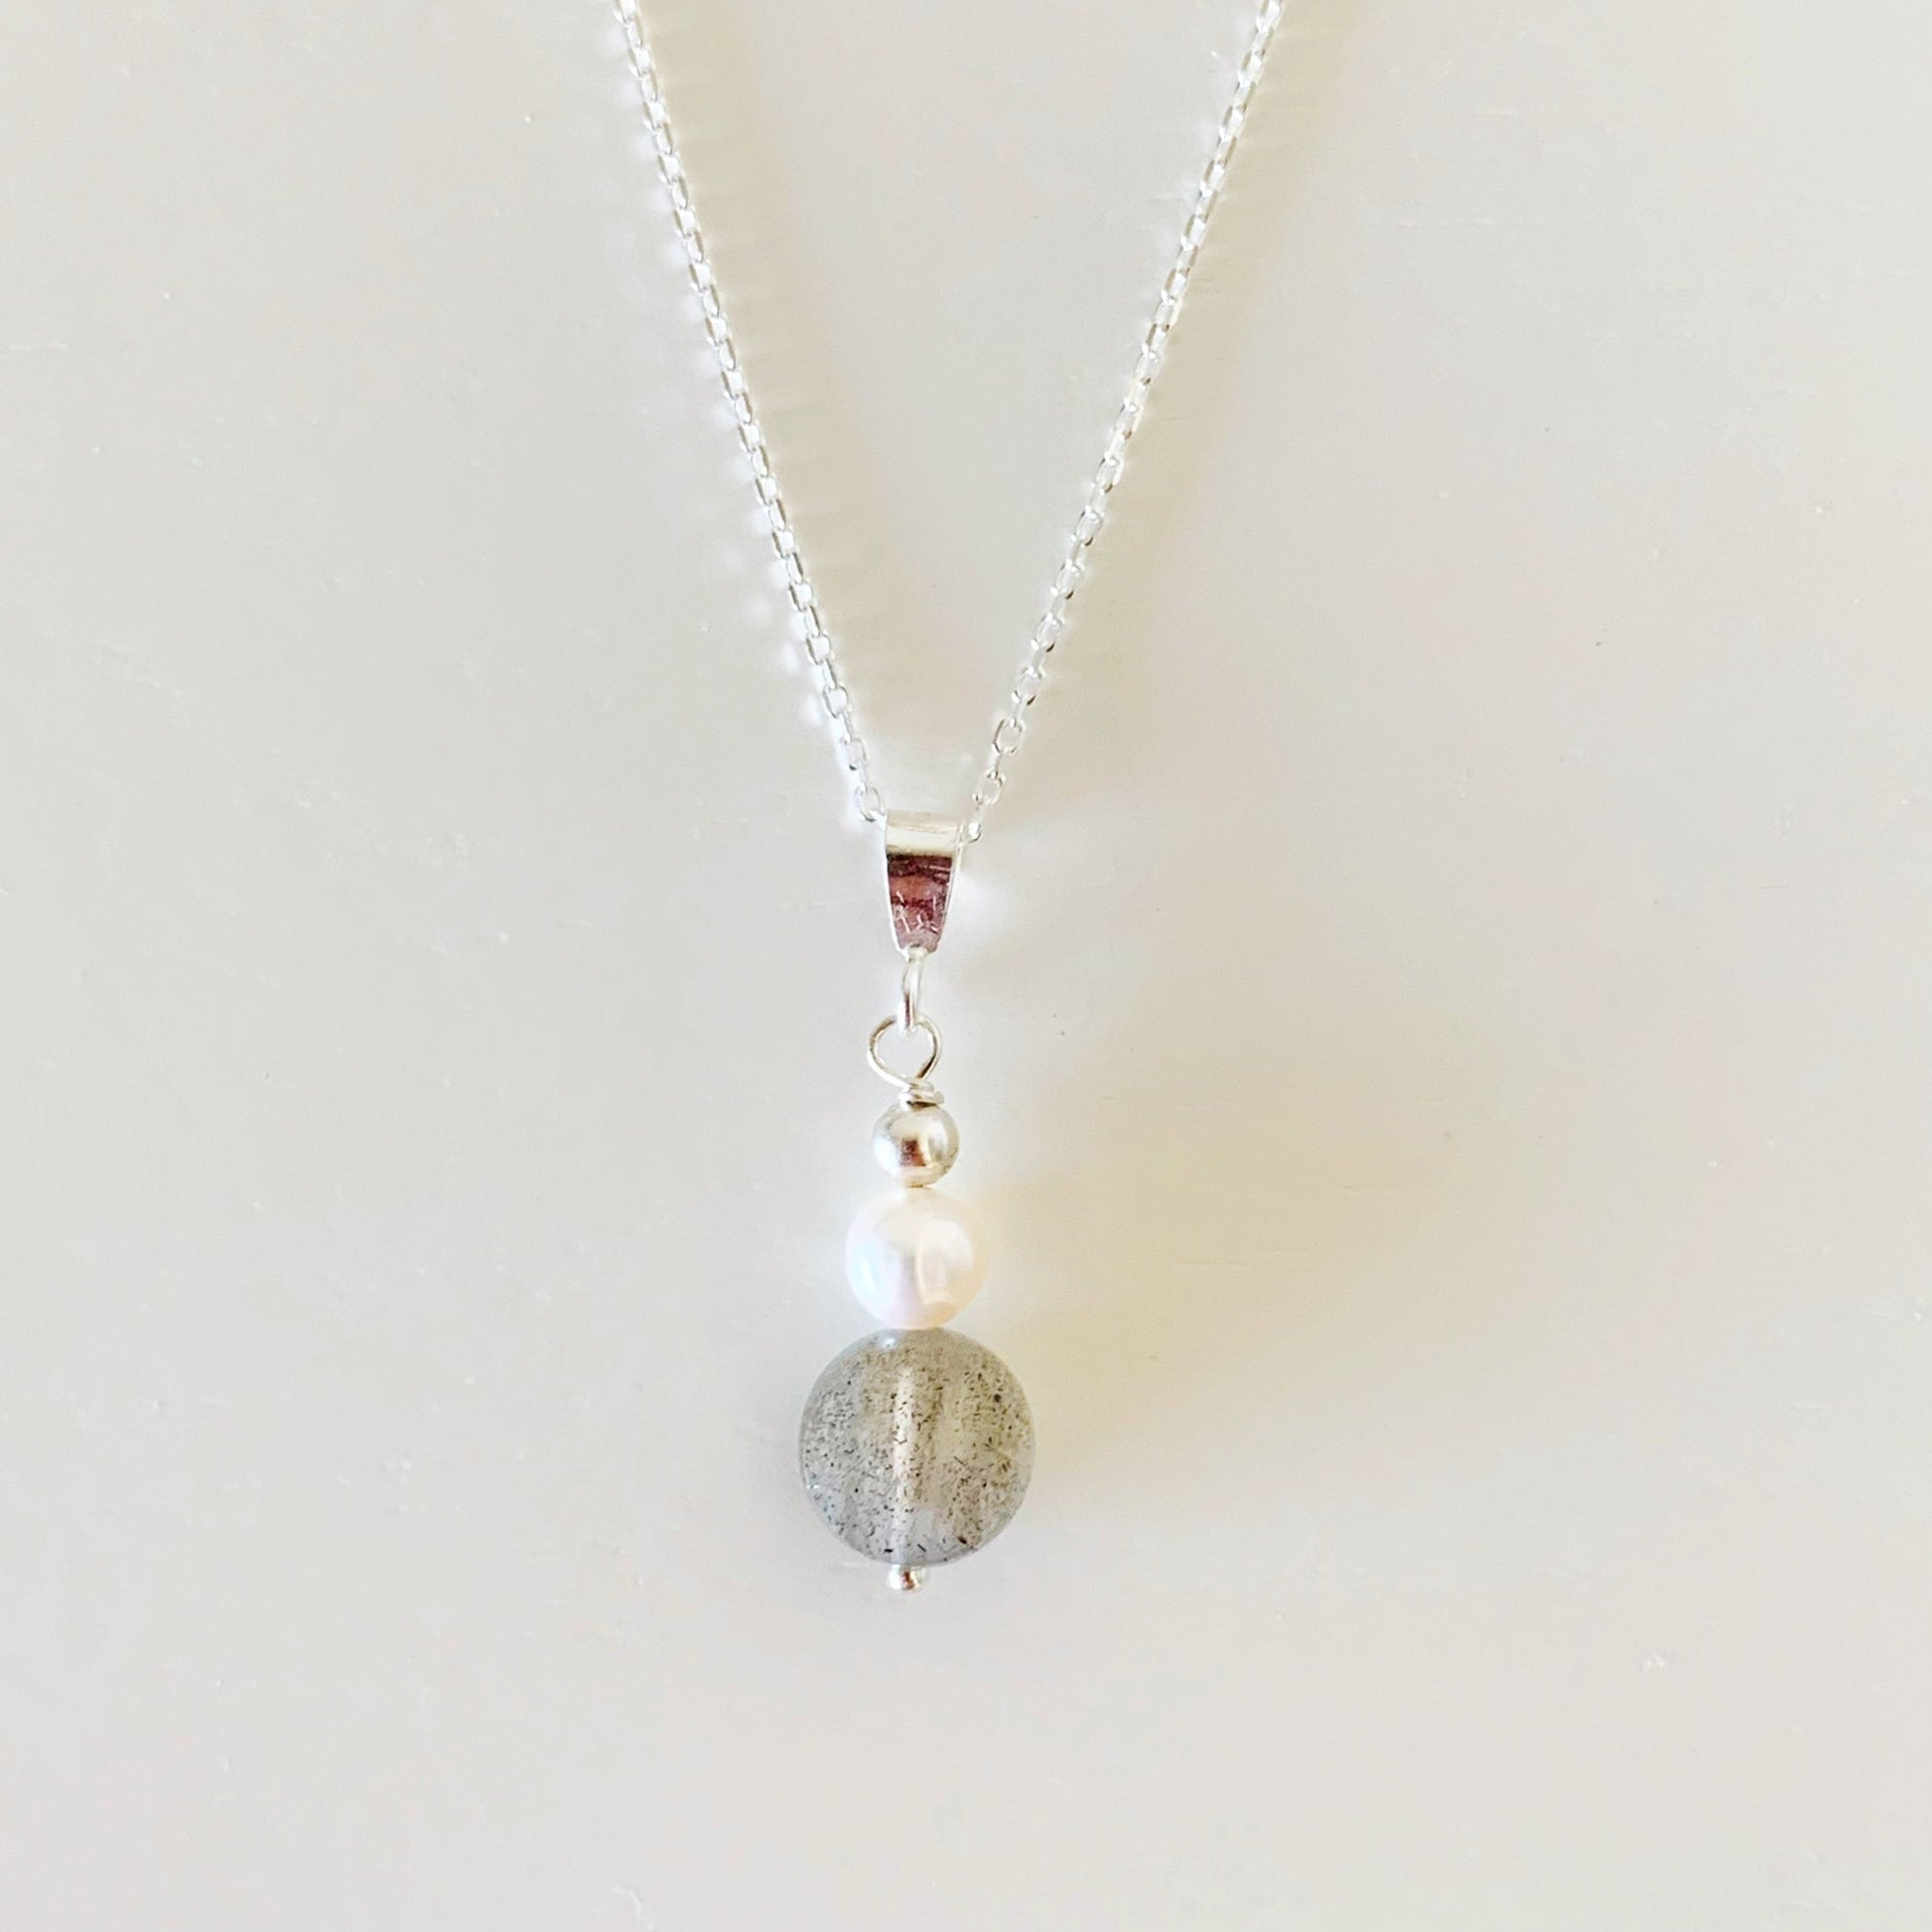 The arctic pendant necklace by mermaids and madeleines is created with a freshwater pearl and a faceted labradorite coin bead and features sterling silver findings and chain. this piece is photographed on a white surface